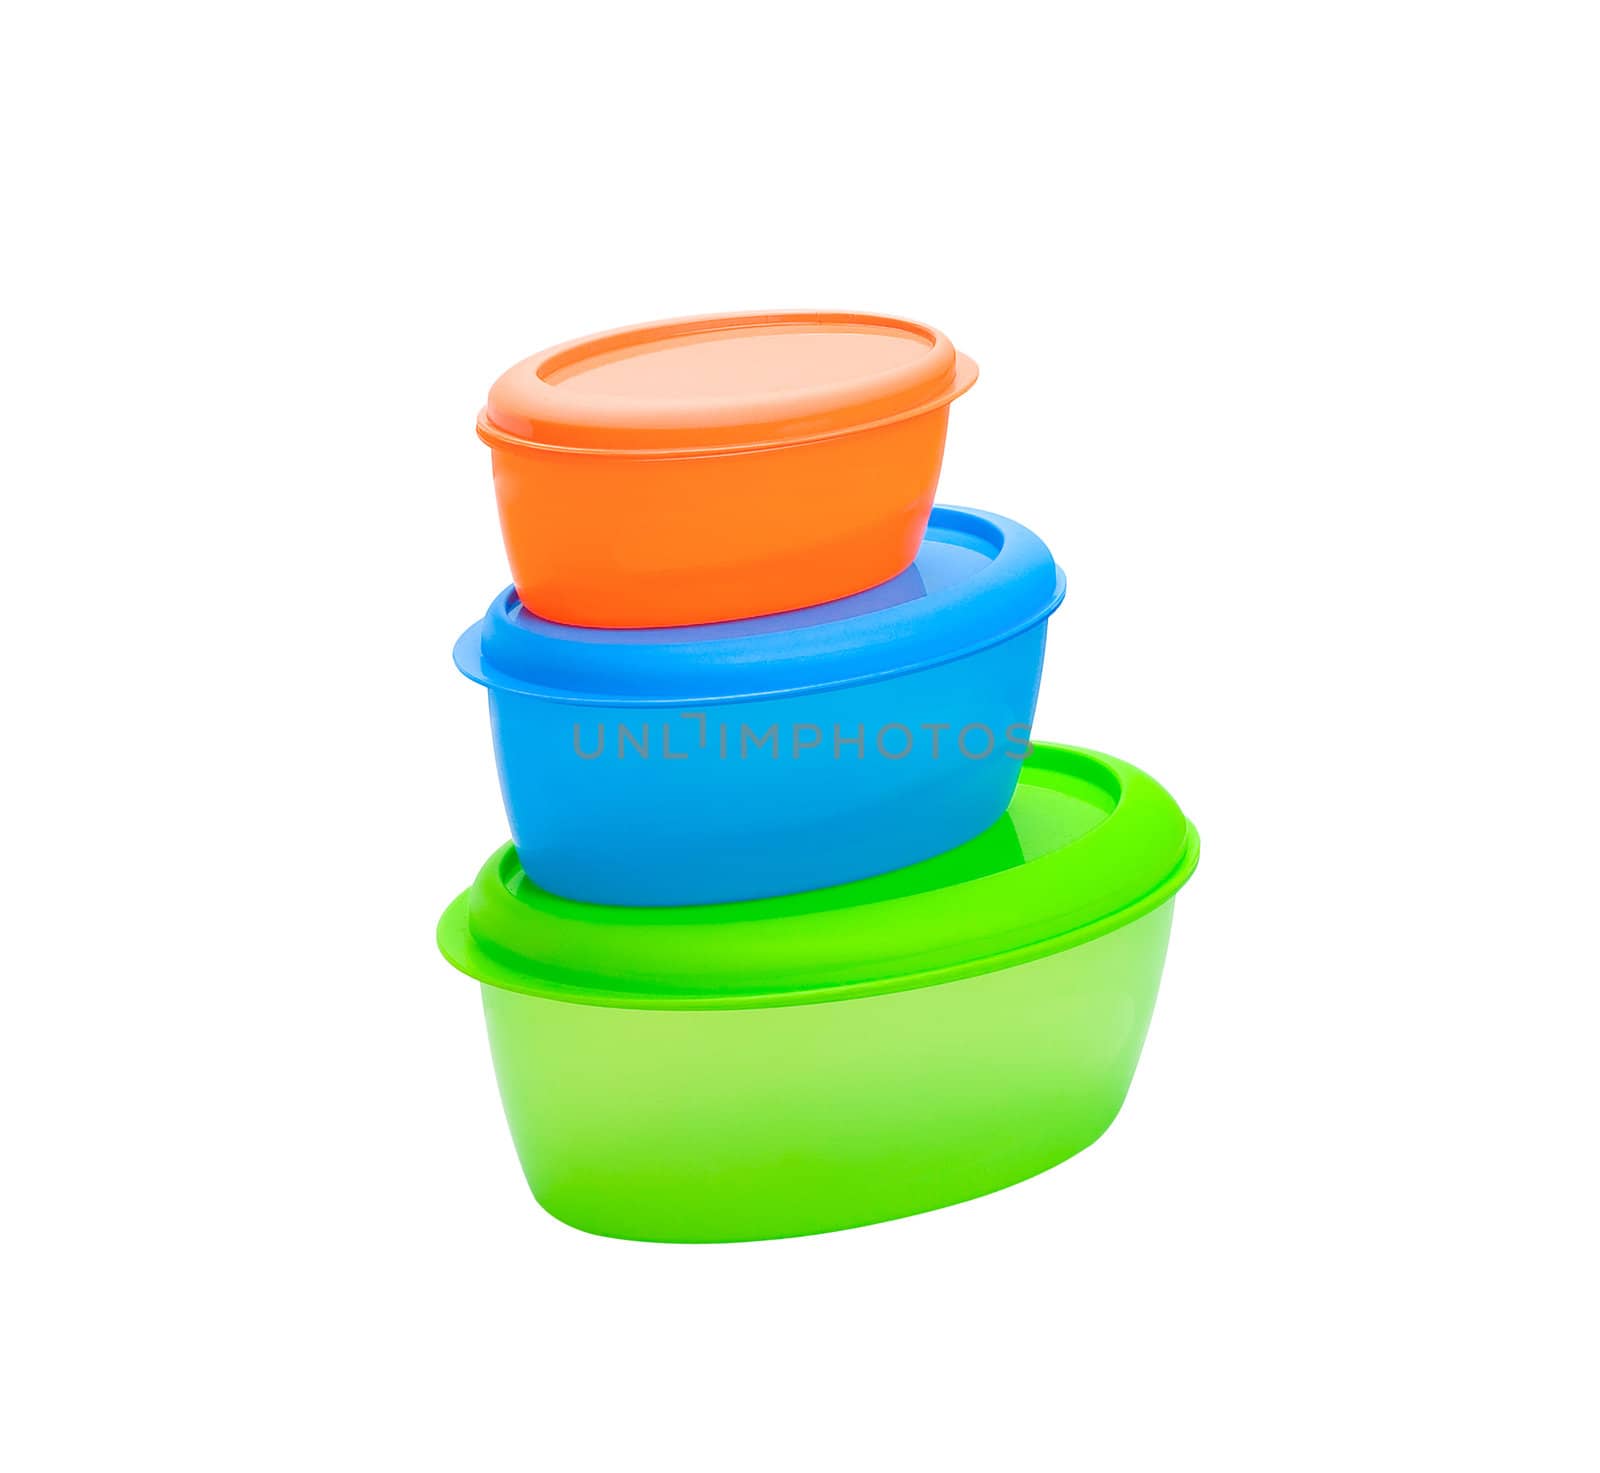 colorful cookie boxes or food boxes isolates 